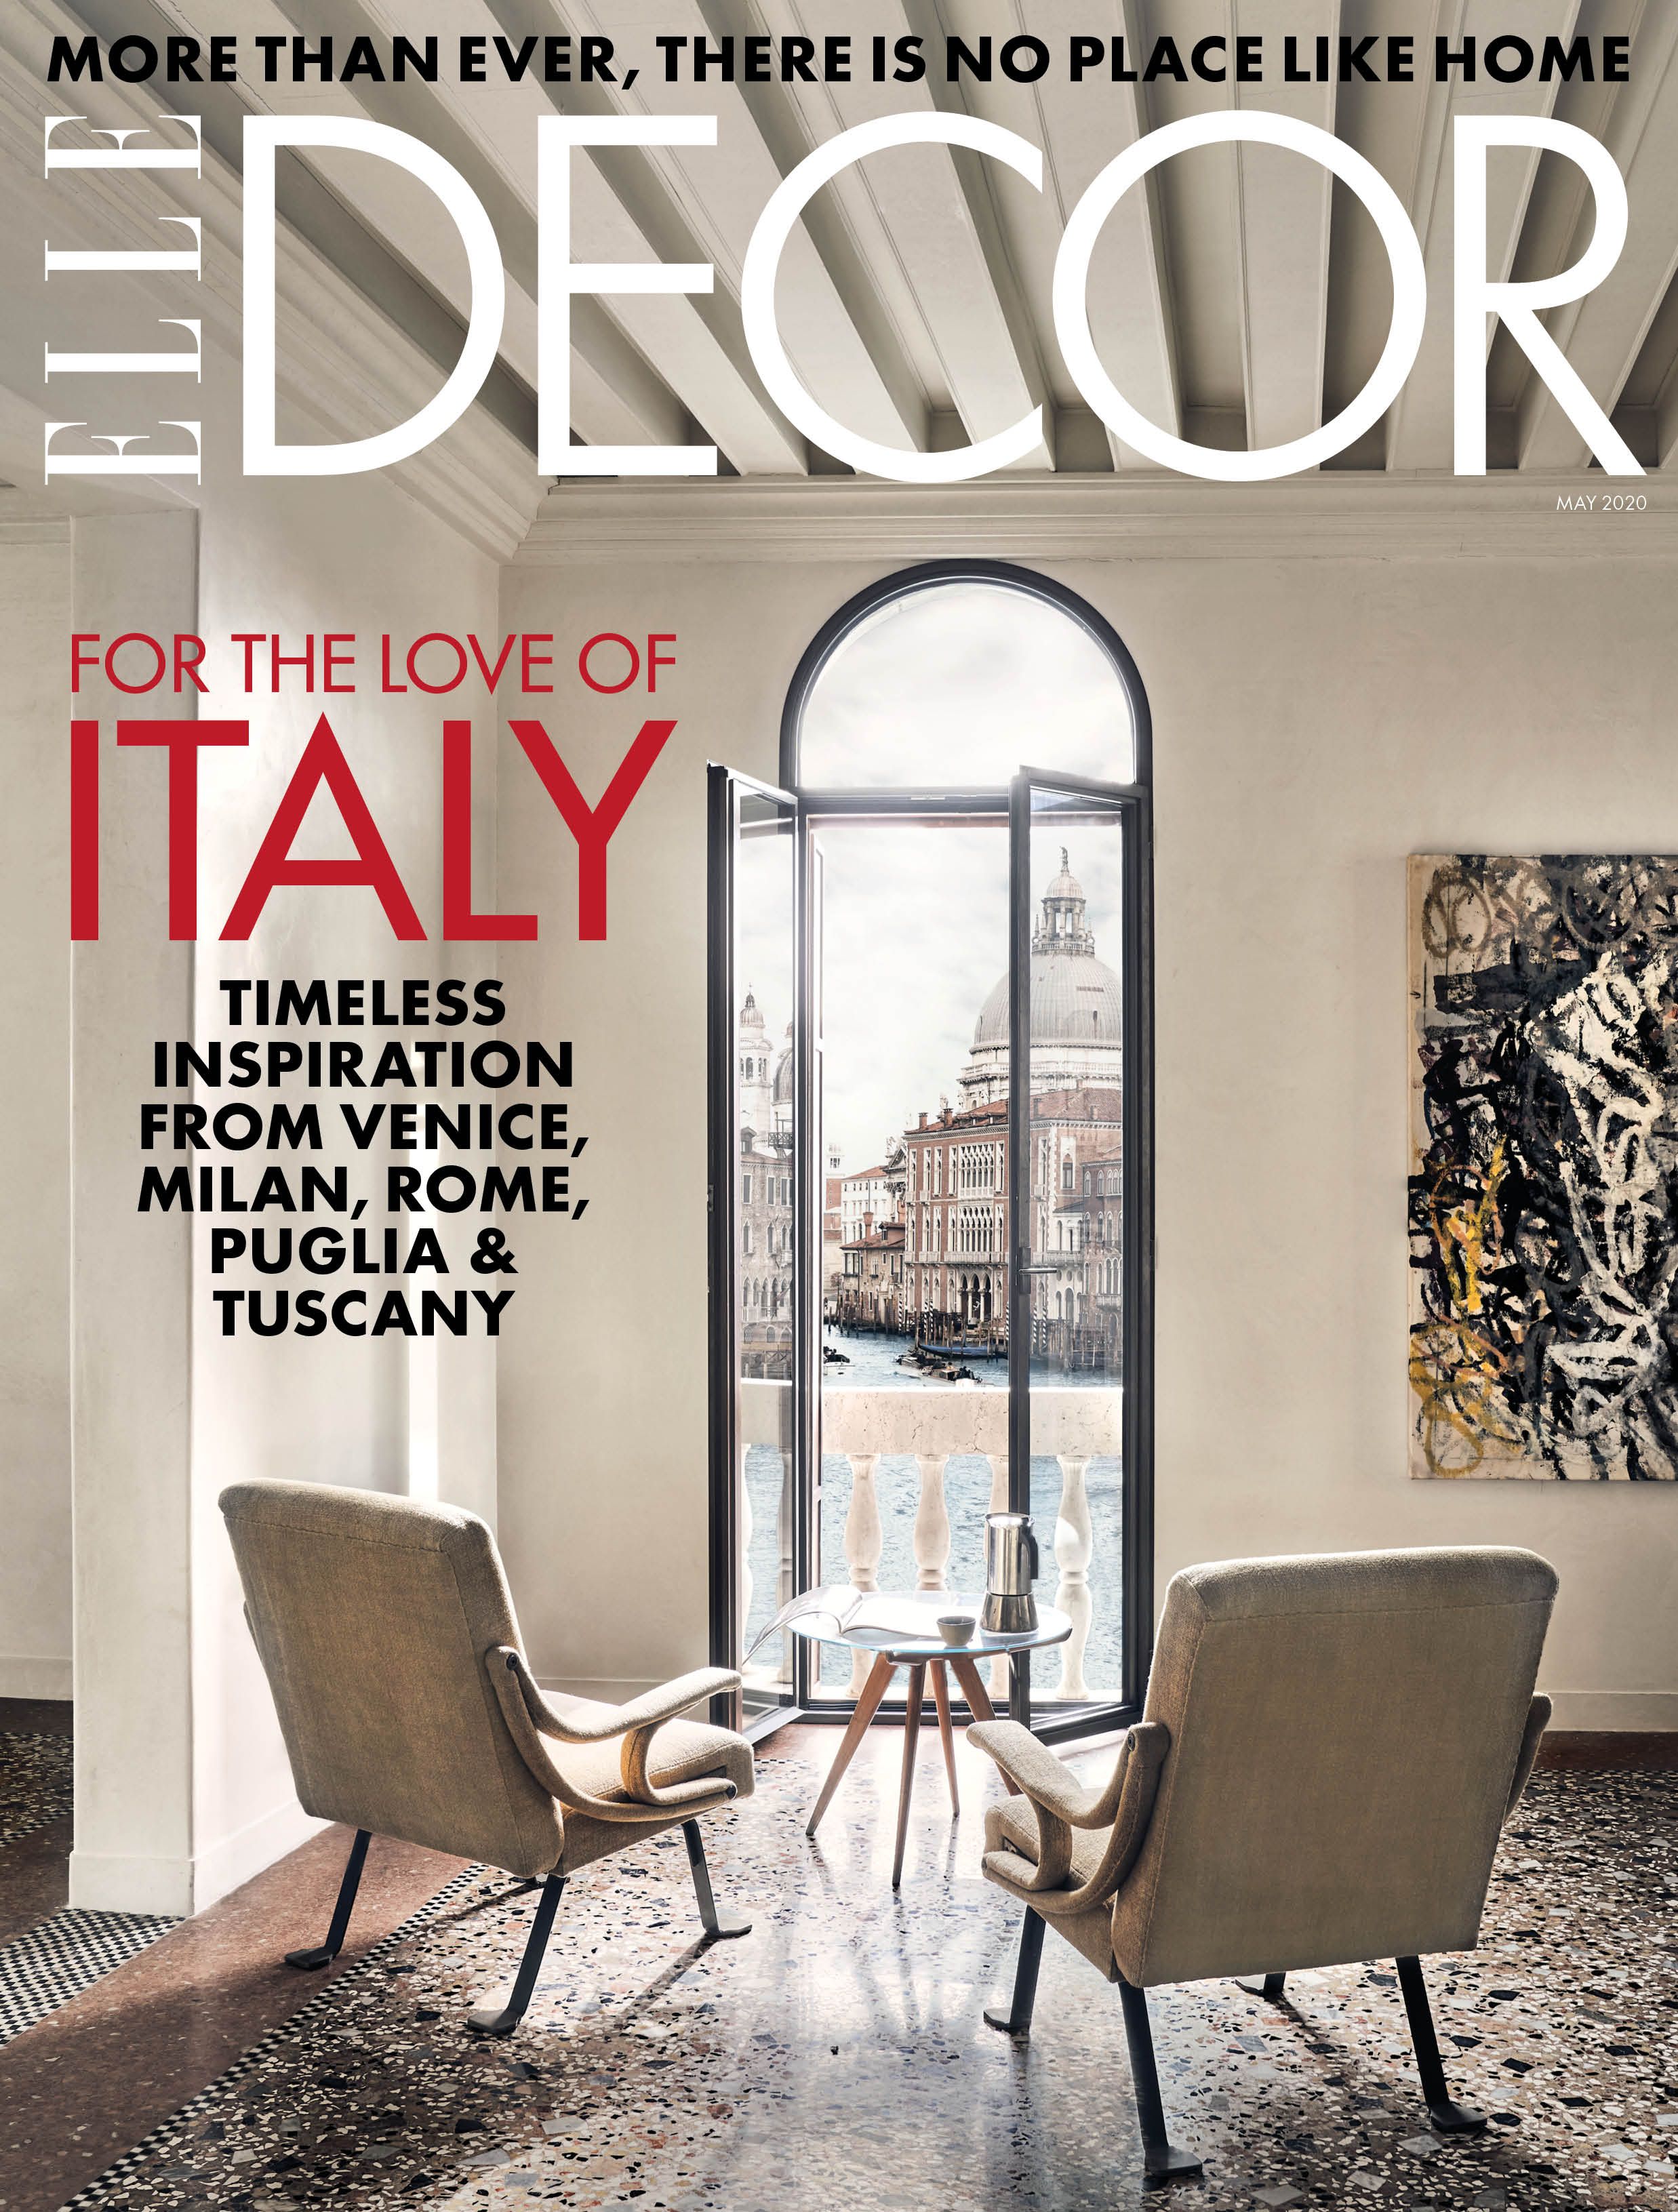 For the Love of Italy - ELLE Decor Celebrates Italy